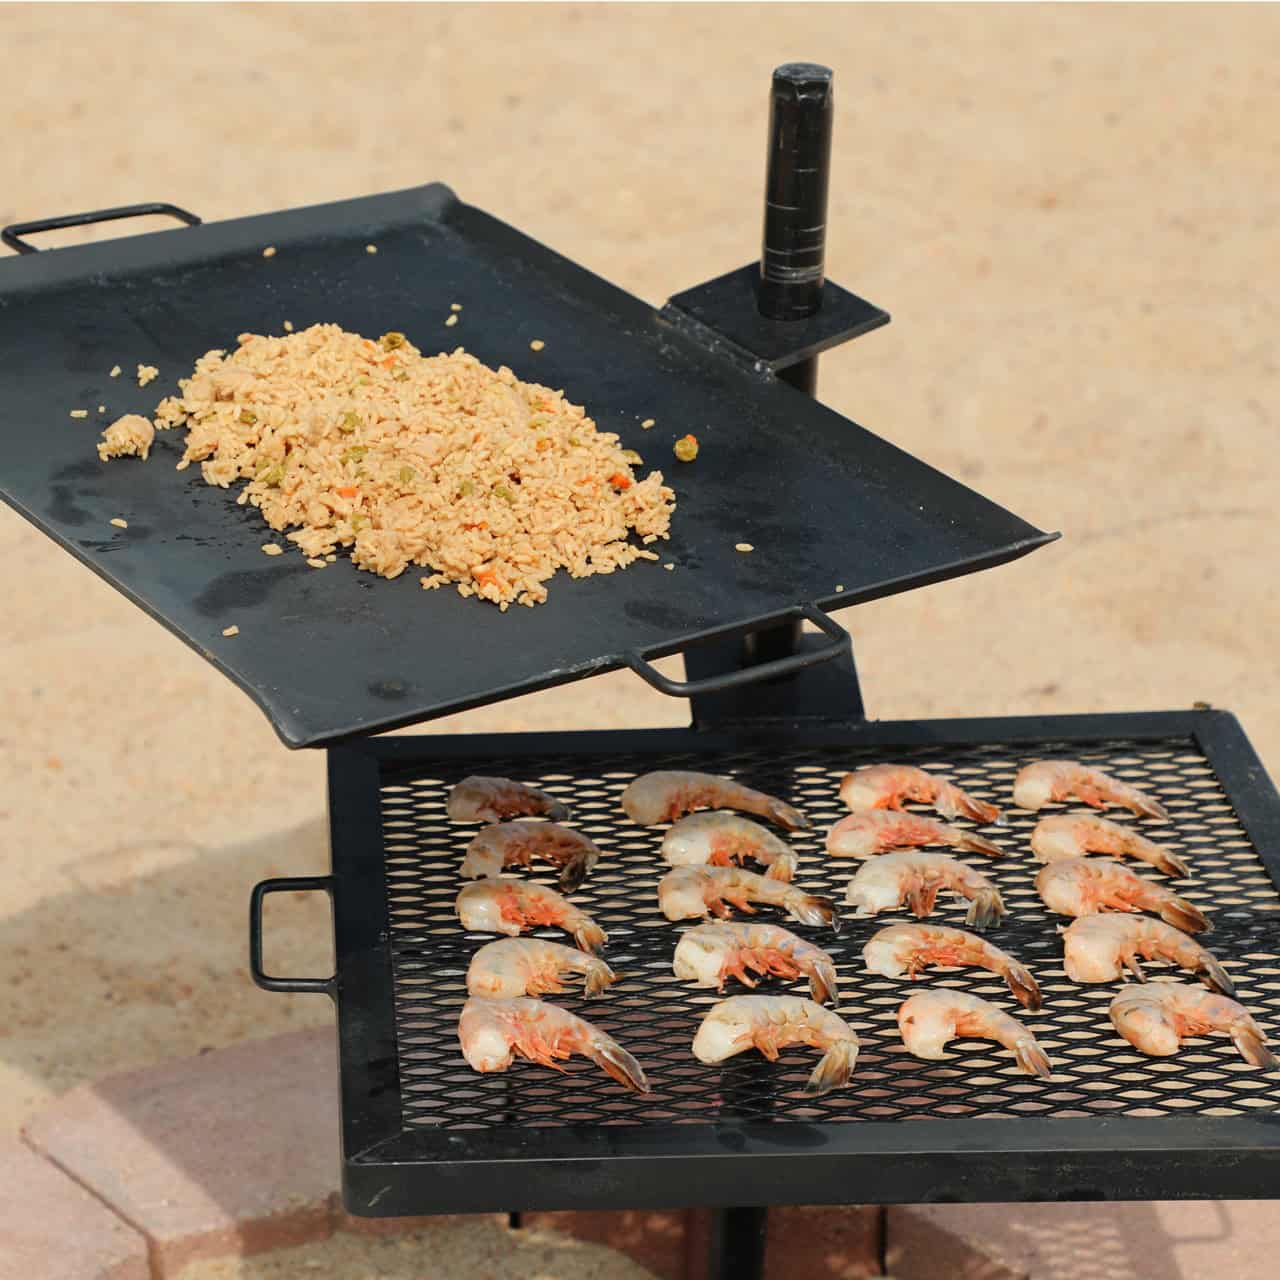 35 Best Smoker Accessories & BBQ Tools for Camping - Camping Food